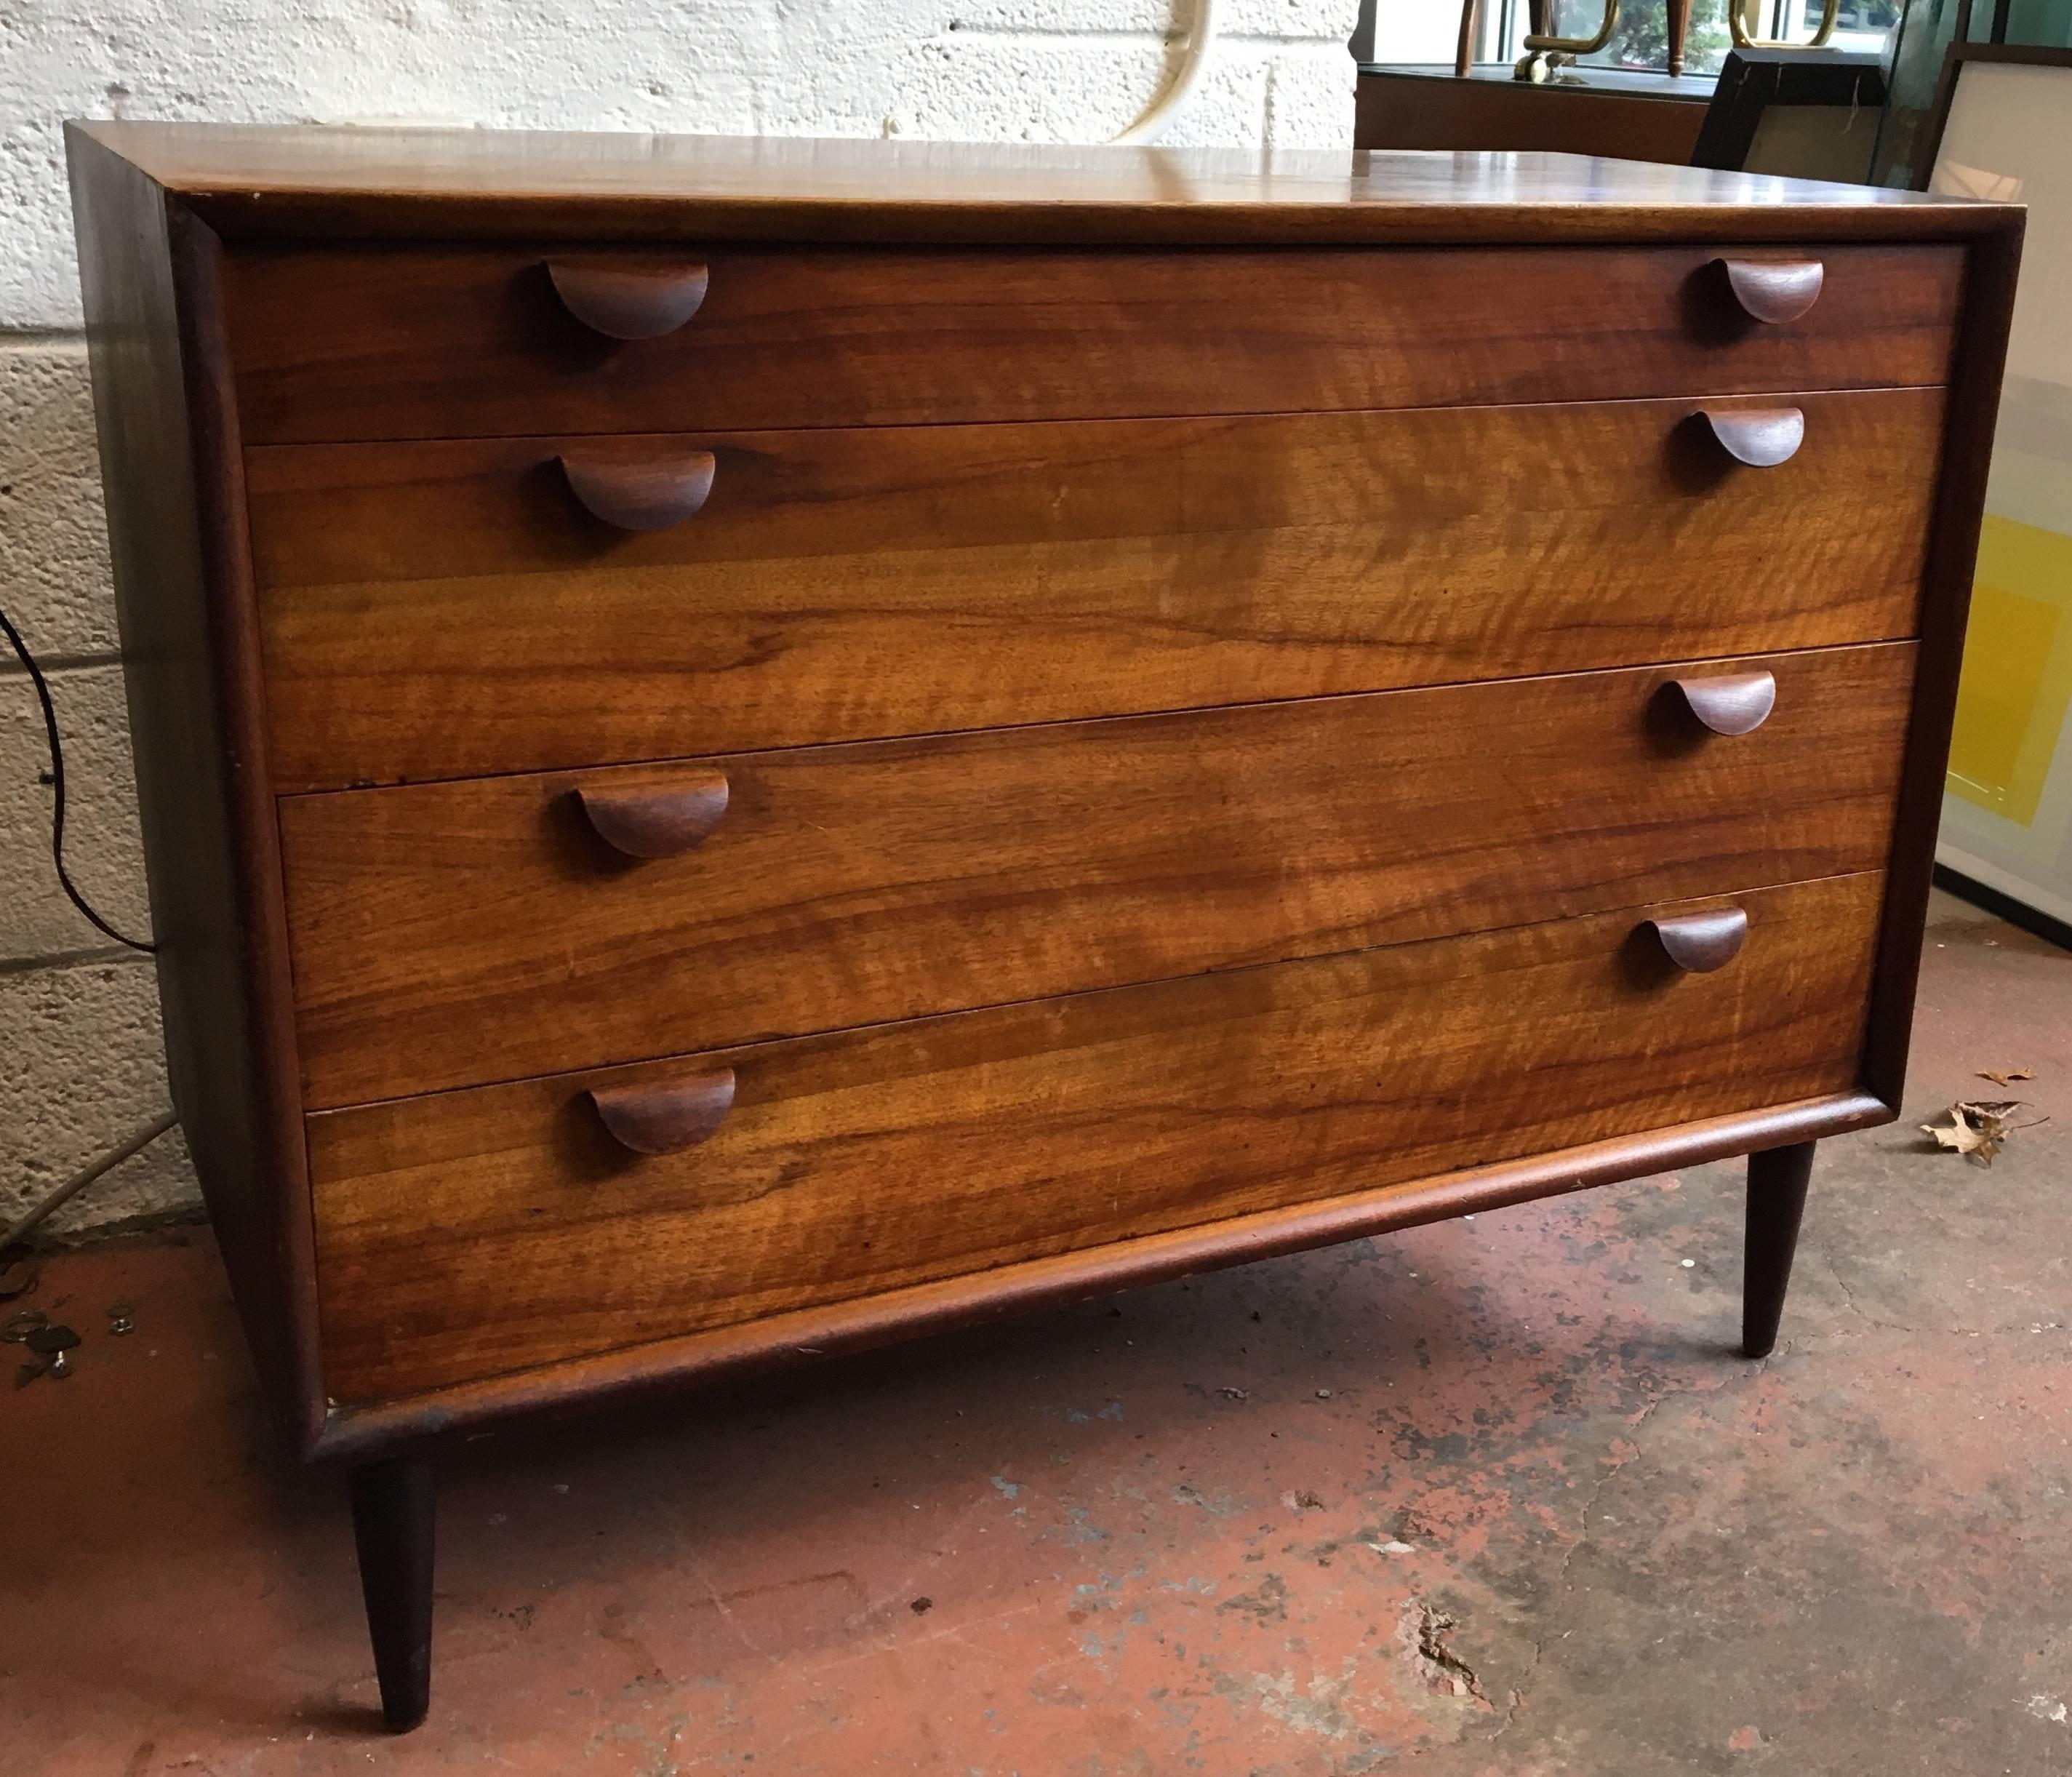 Scandinavian Modern walnut chest of drawers with unusual bent plywood pulls.
Avantgarden Ltd. cultivates unexpected and exceptional lighting, furniture and design. To view items in person please visit our showroom in Pound Ridge, New York.